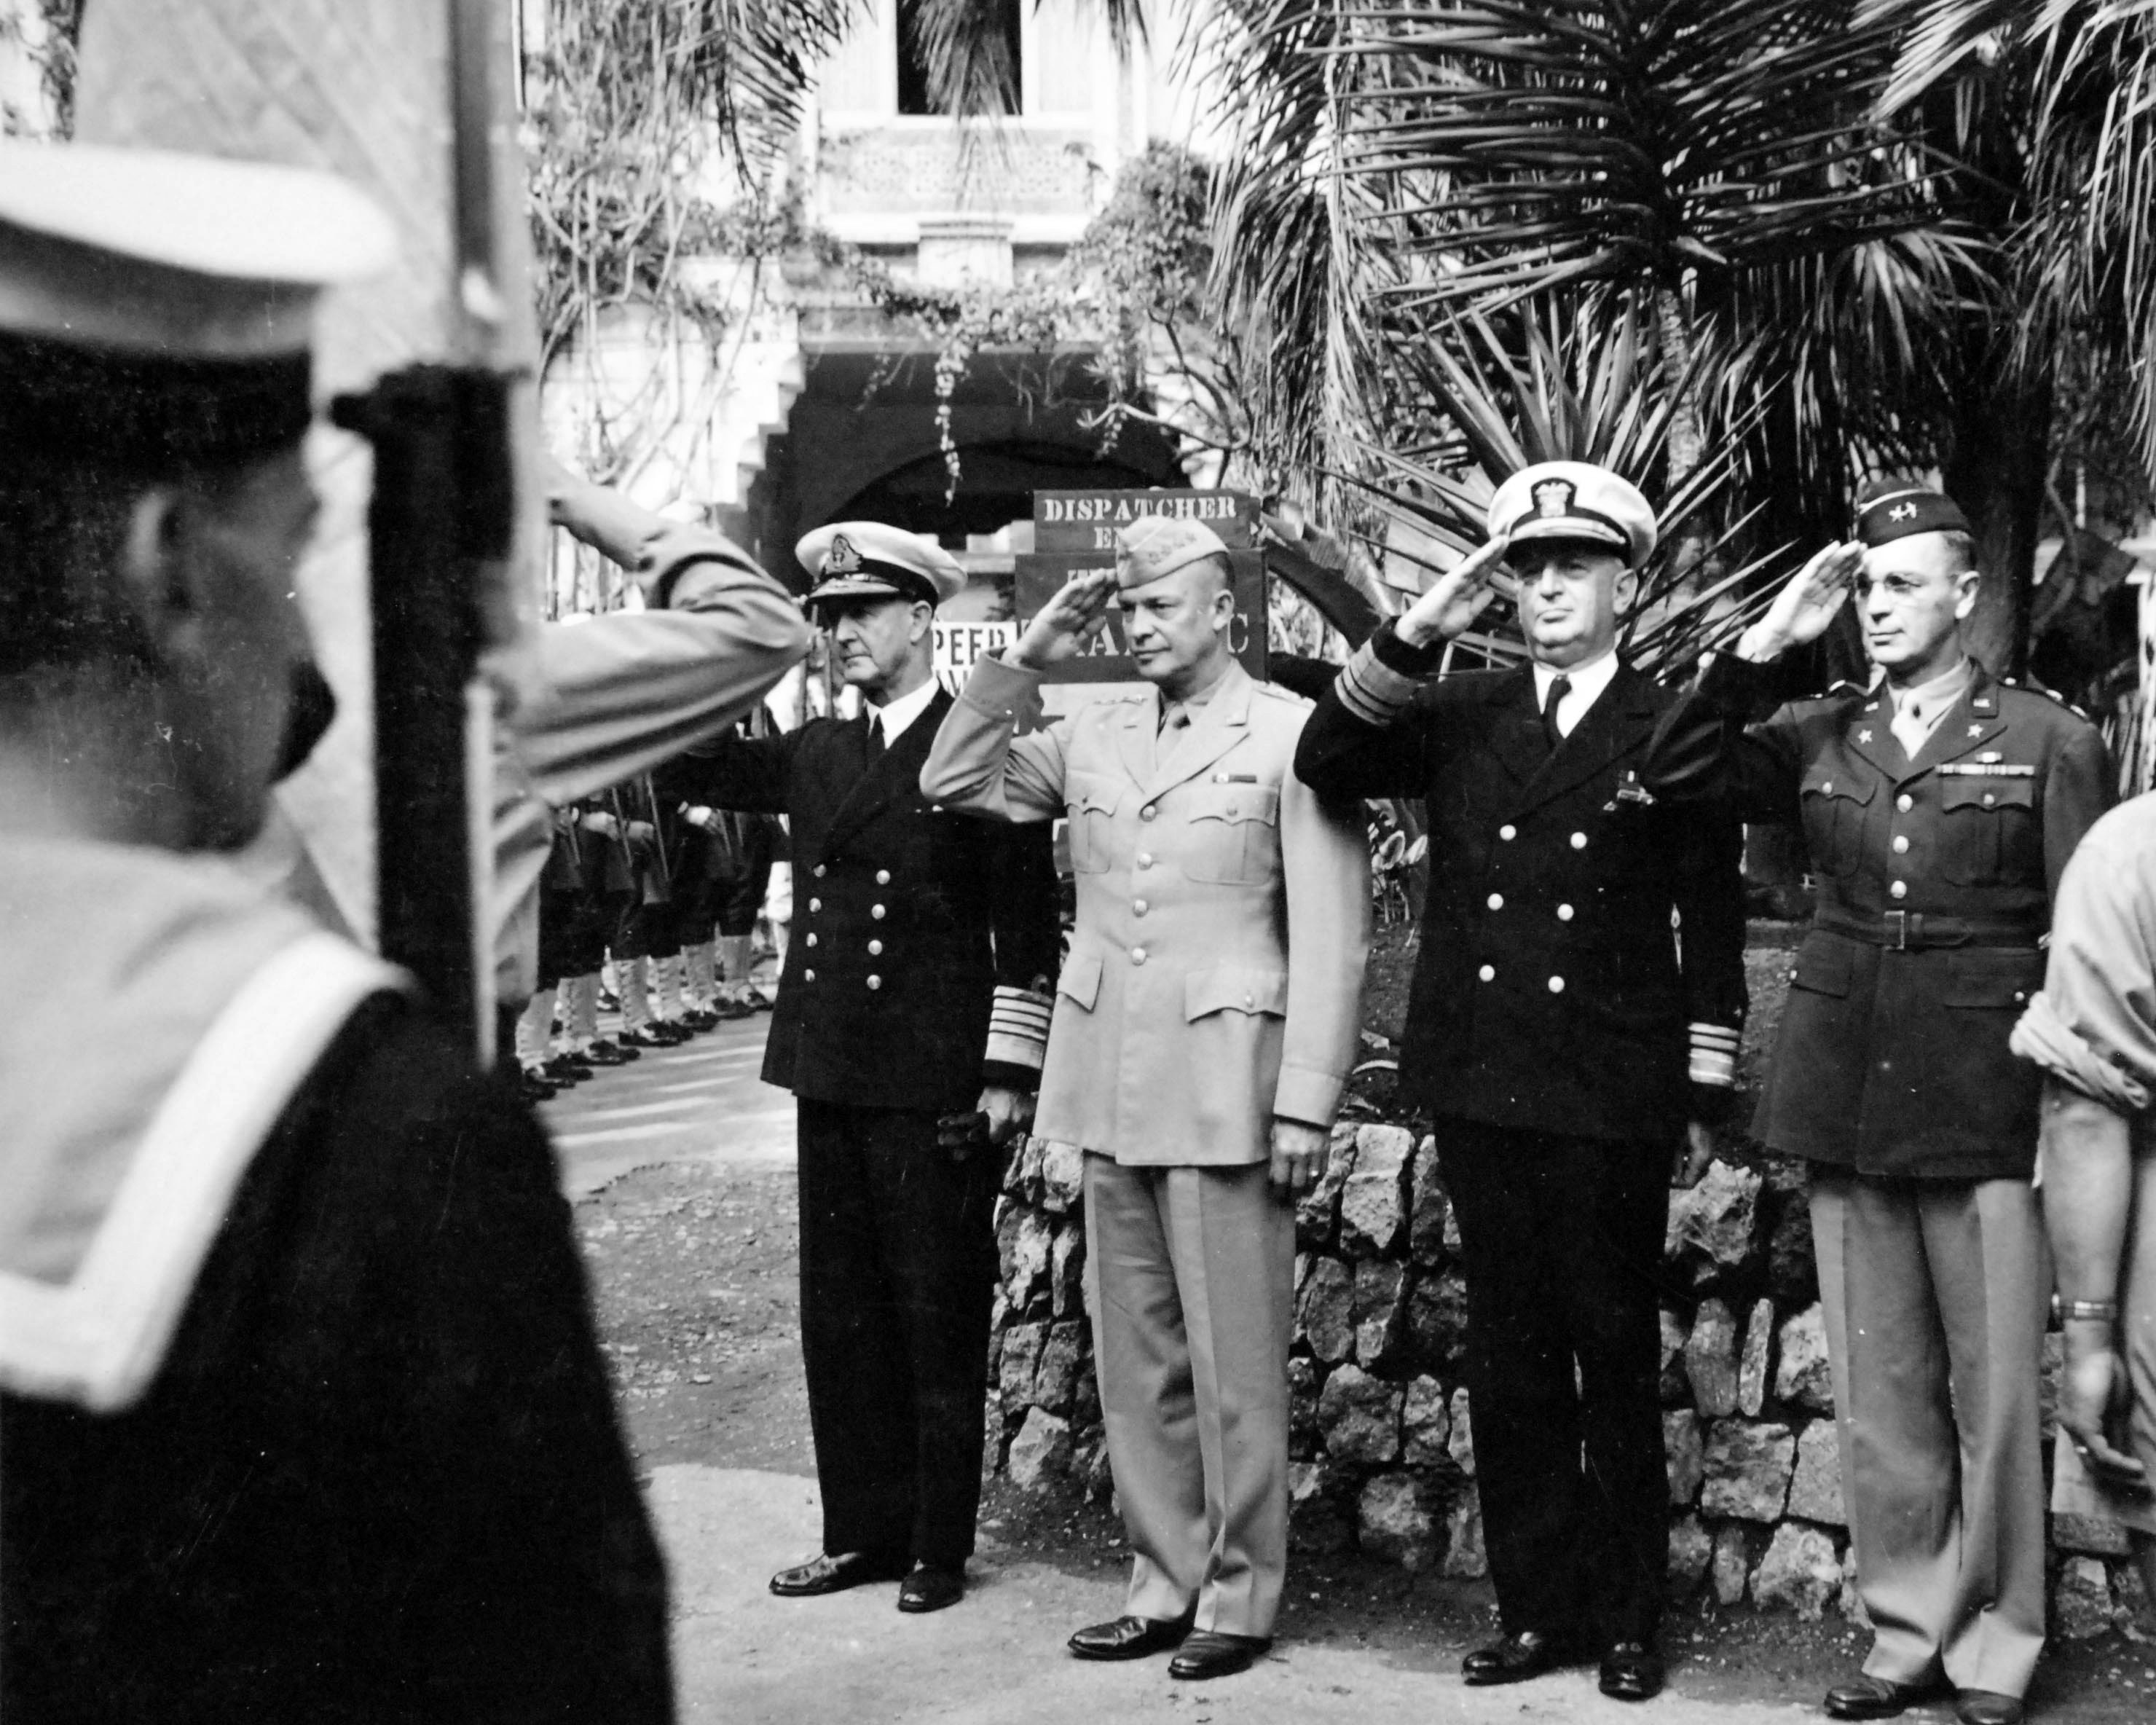 Sir Andrew Cunningham, Dwight Eisenhower, Henry Hewitt, and Walter Bedell Smith at Allied Forces Headquarters in Hotel St. George, Algiers, Algeria, 16 Oct 1943.